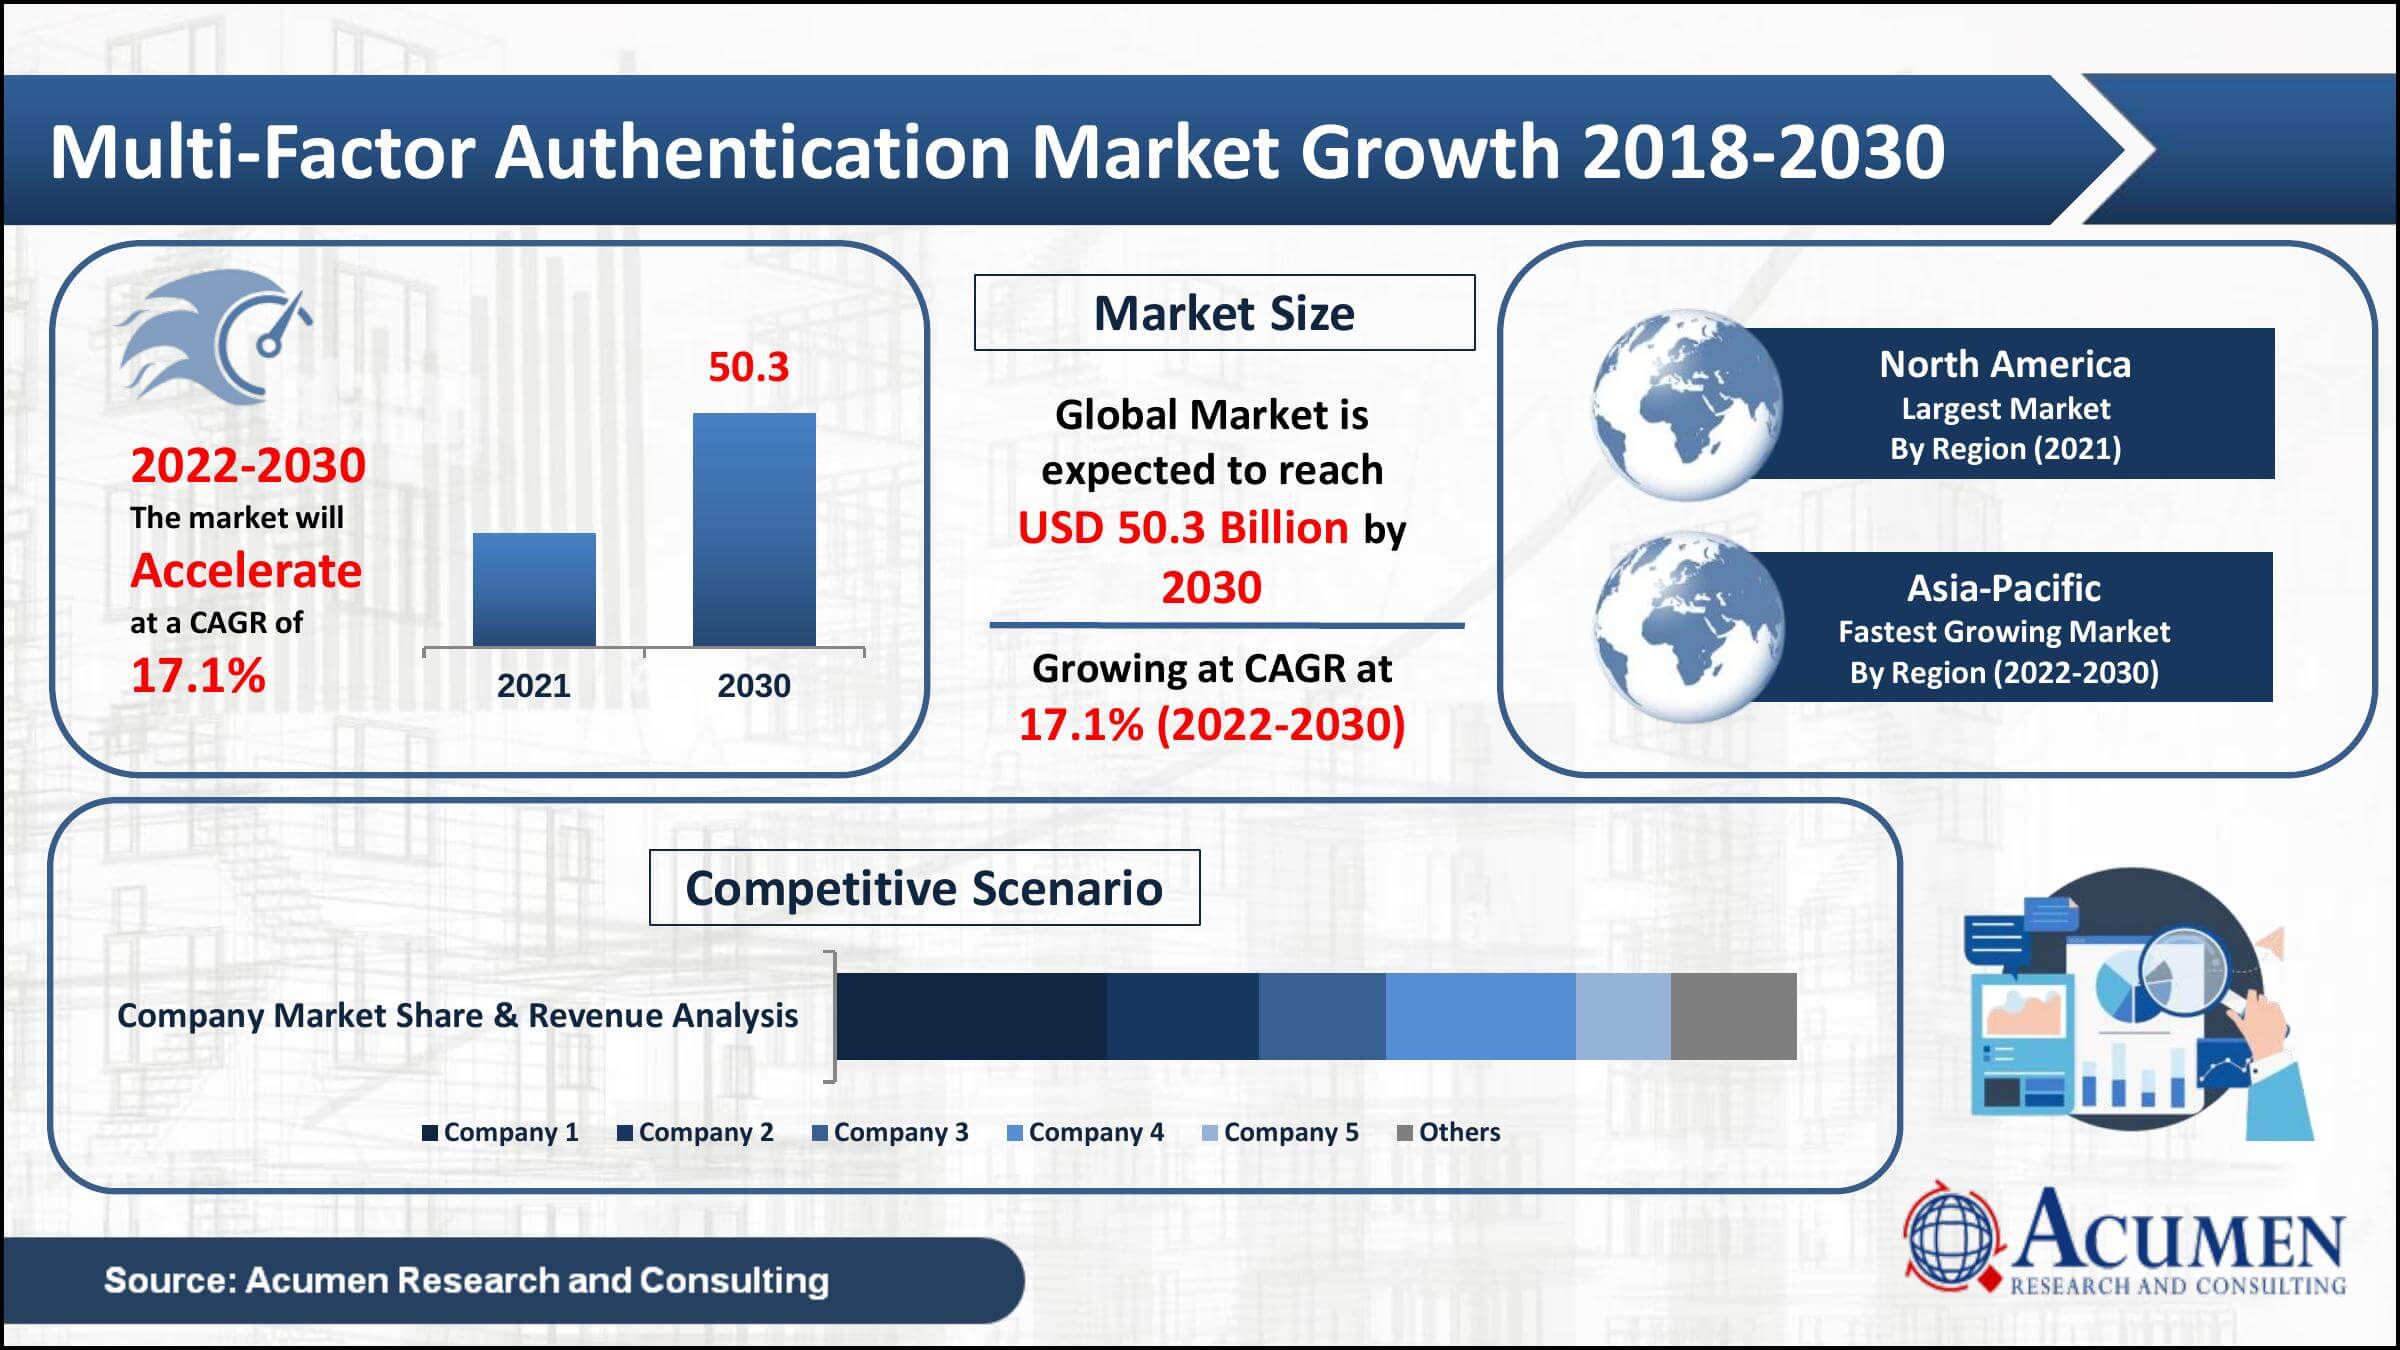 Multi-Factor Authentication Market value to reach USD 50.3 Billion by 2030 at CAGR of 17.1% as per Acumen Research and Consulting